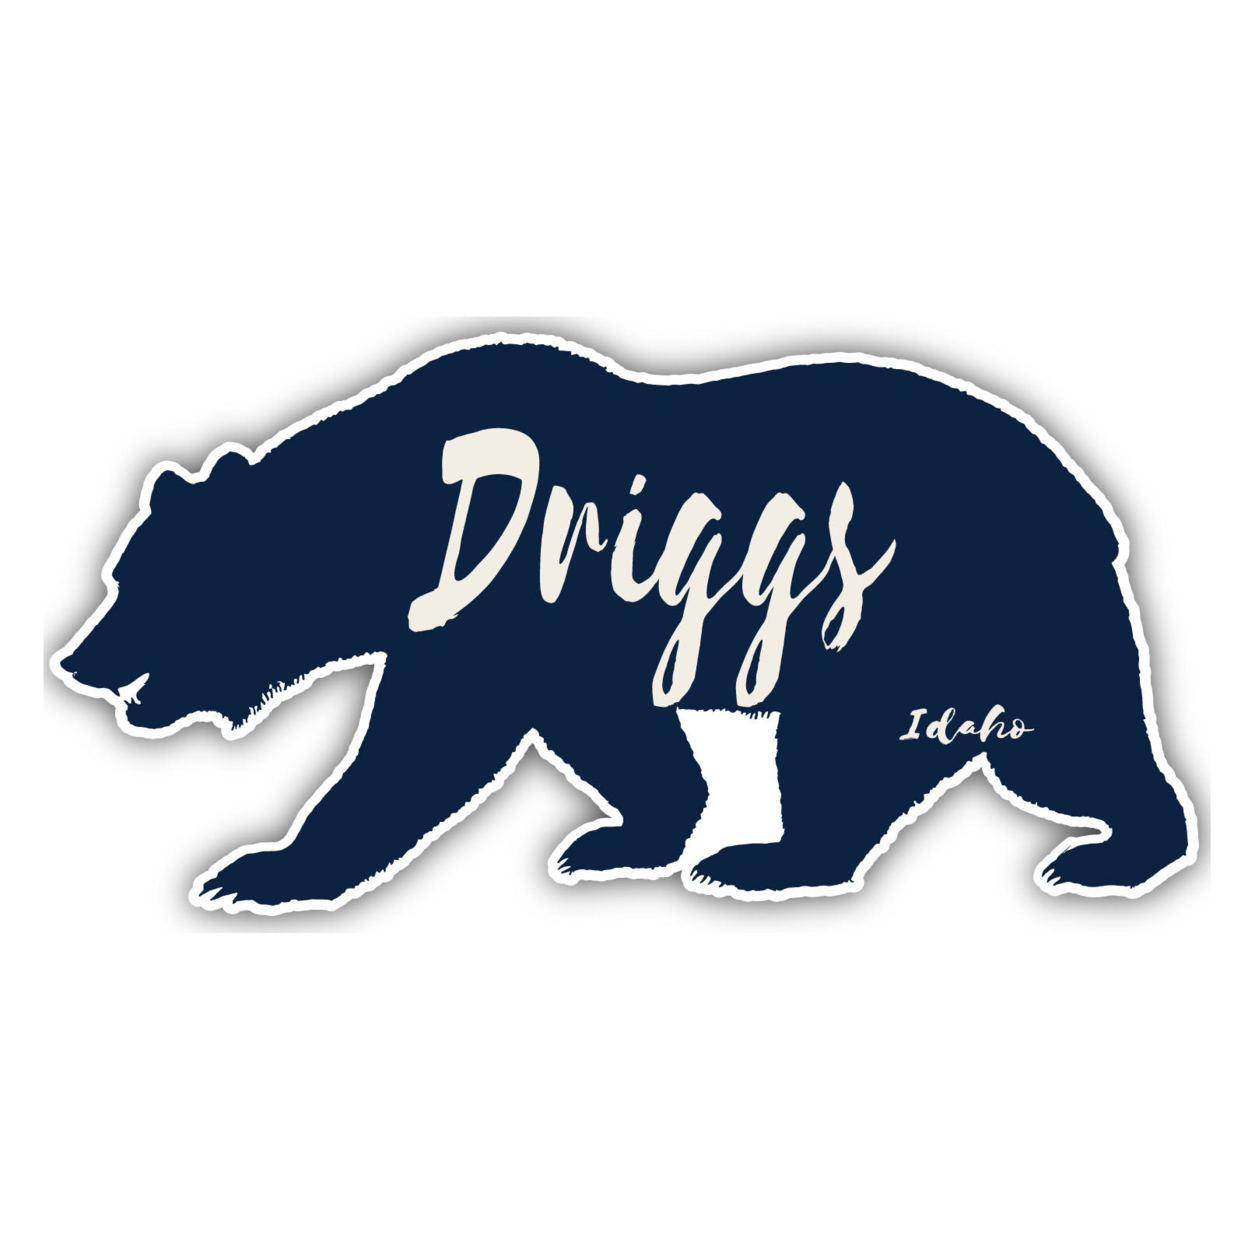 Driggs Idaho Souvenir Decorative Stickers (Choose Theme And Size) - 4-Pack, 6-Inch, Bear